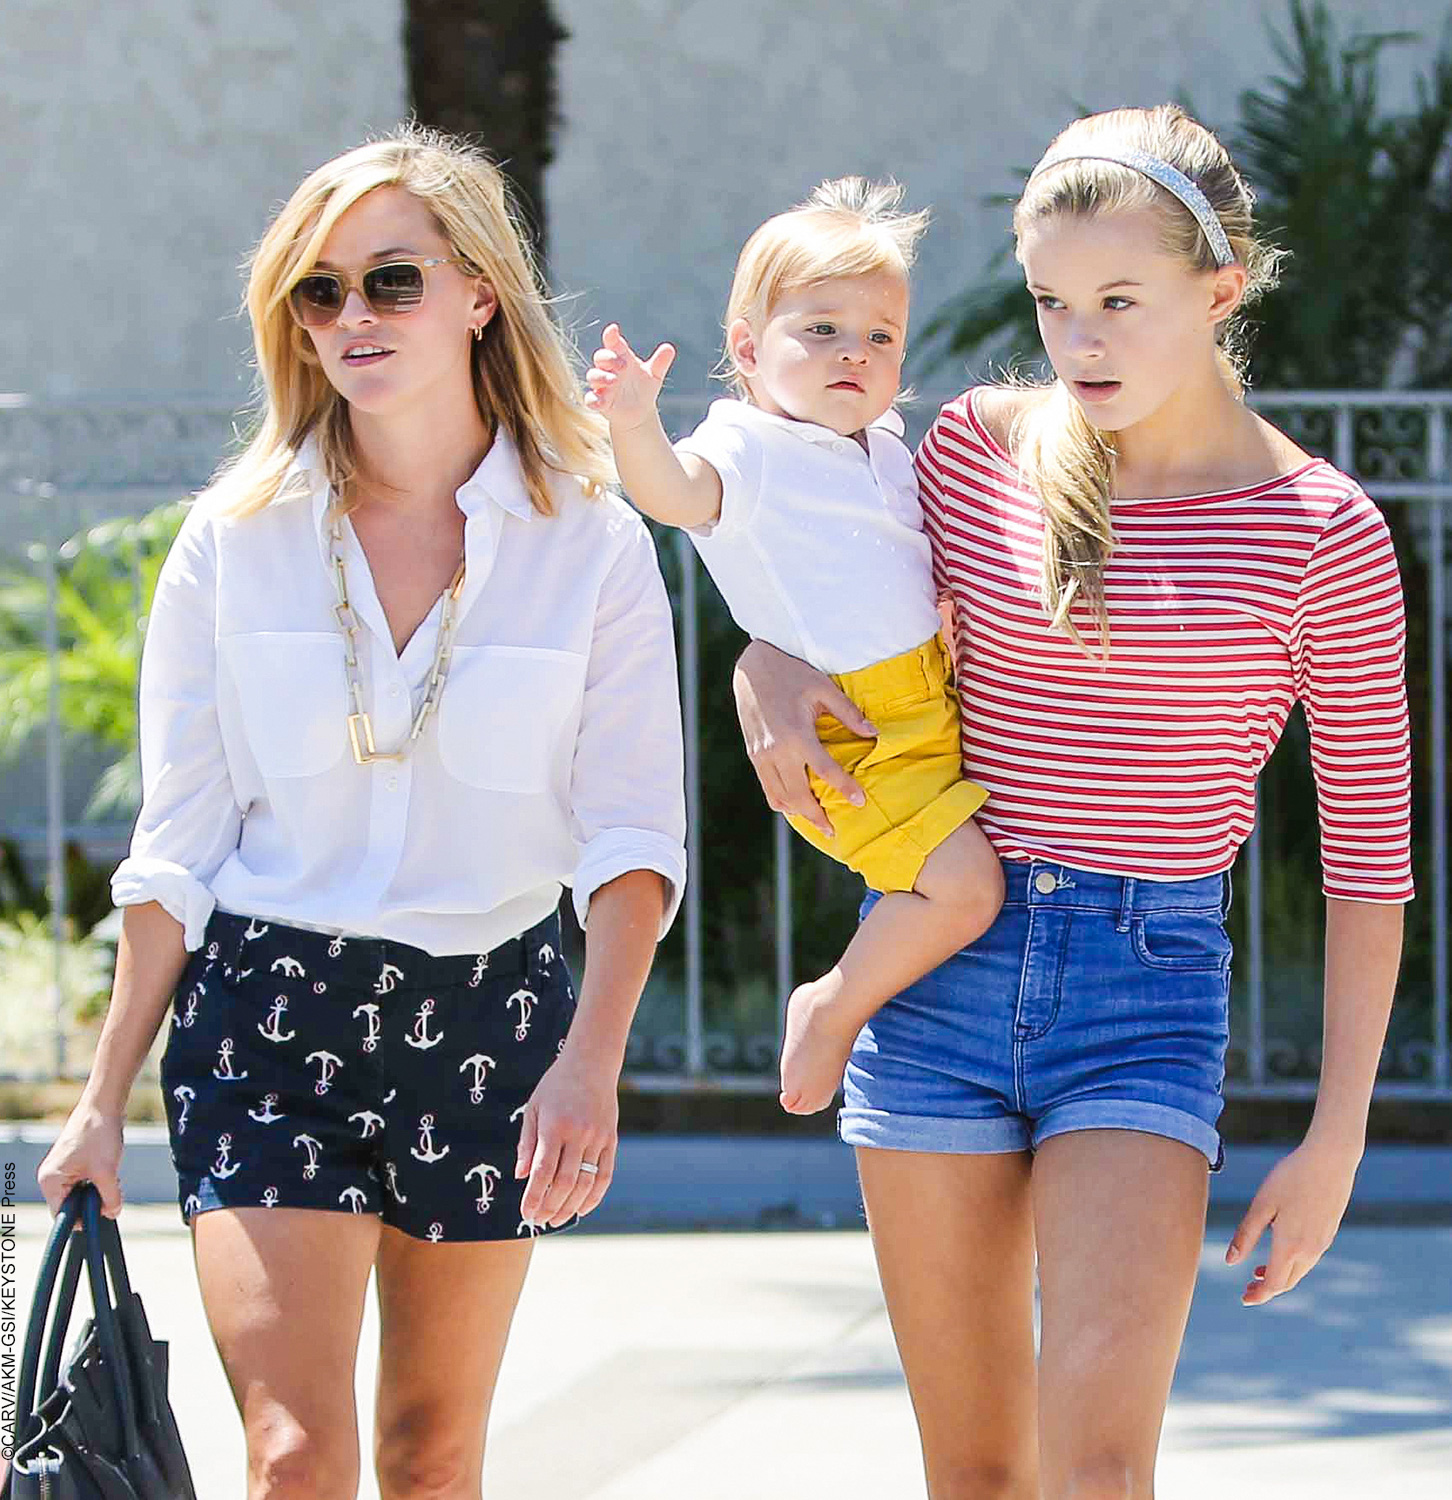 Ava Phillippe, whose father is Ryan Phillippe, is the spitting image of her beautiful mother, Reese Witherspoon. Here, the long-legged teenager, who’s holding her younger half- brother Tennessee, looks as though she could be Reese in her Cruel Intentions days.